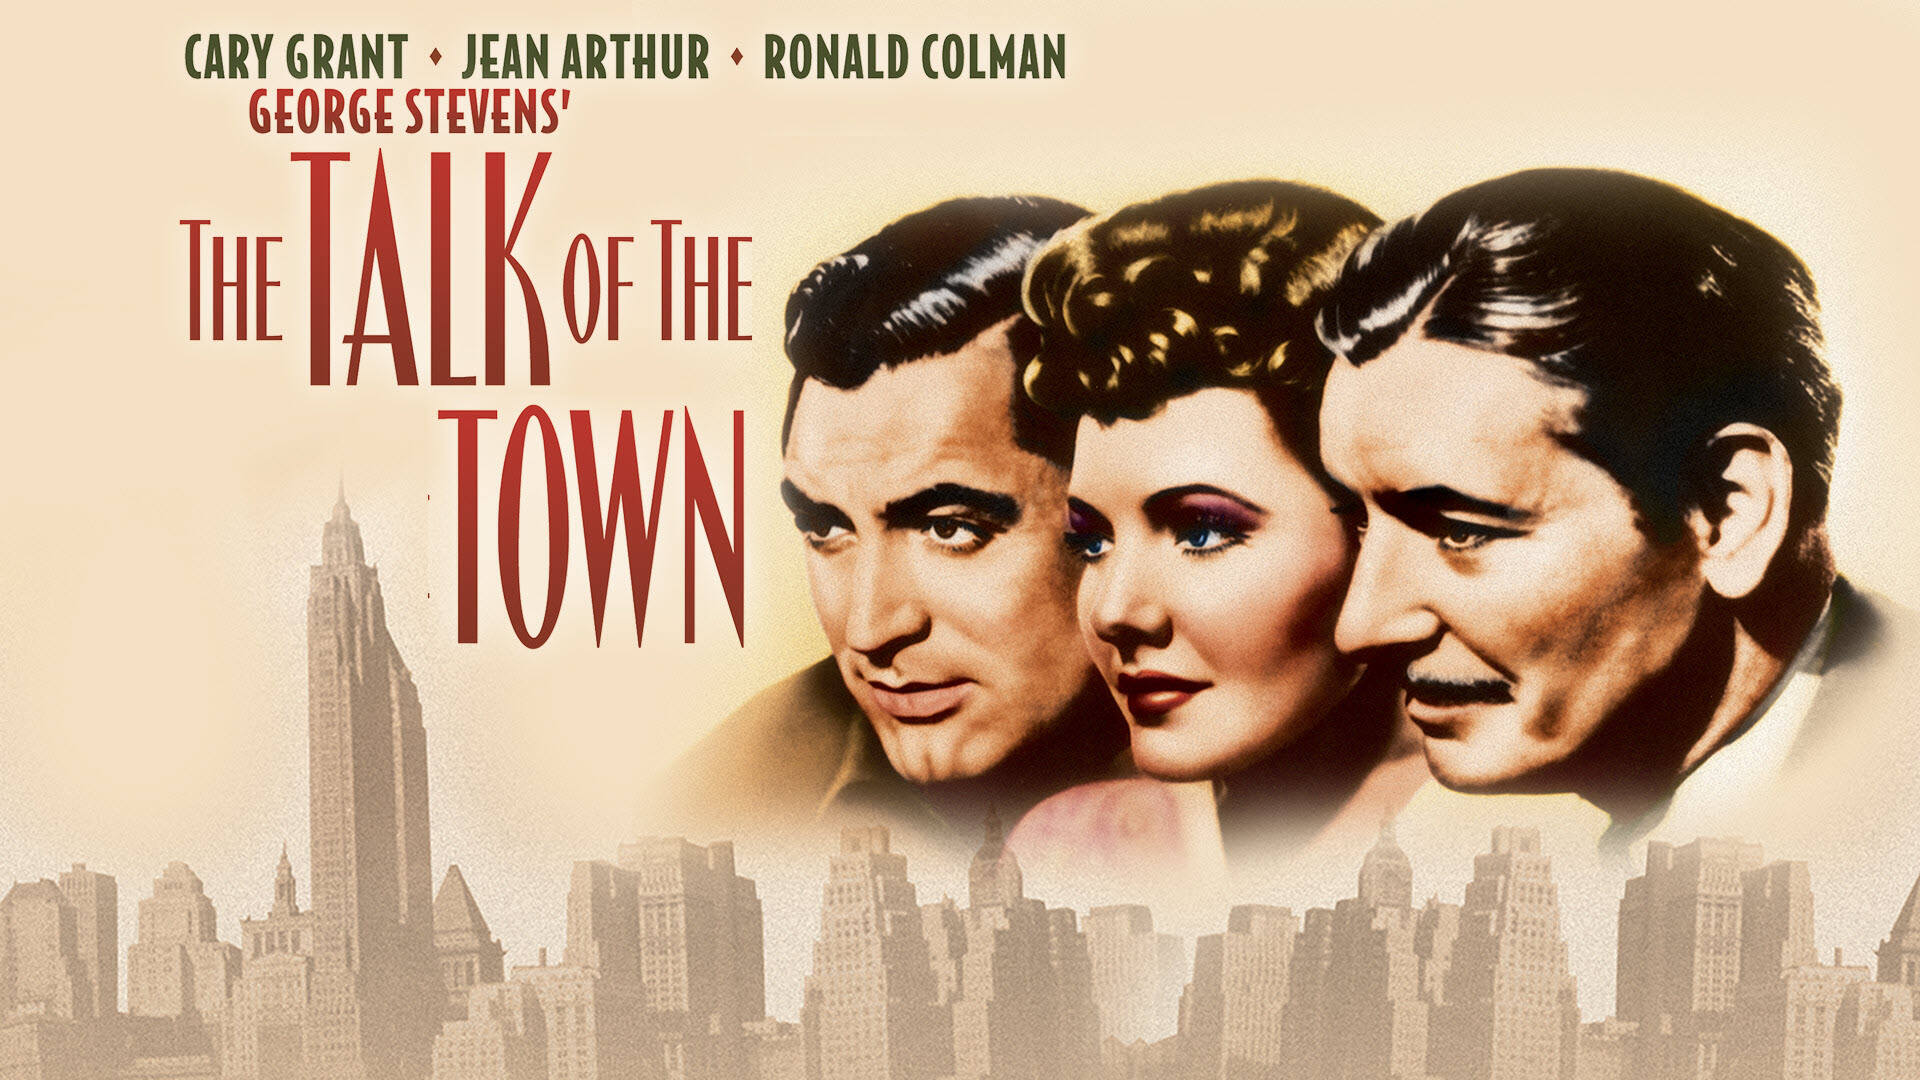 The Town: 9 Behind-The-Scenes Facts About Ben Affleck's Movie